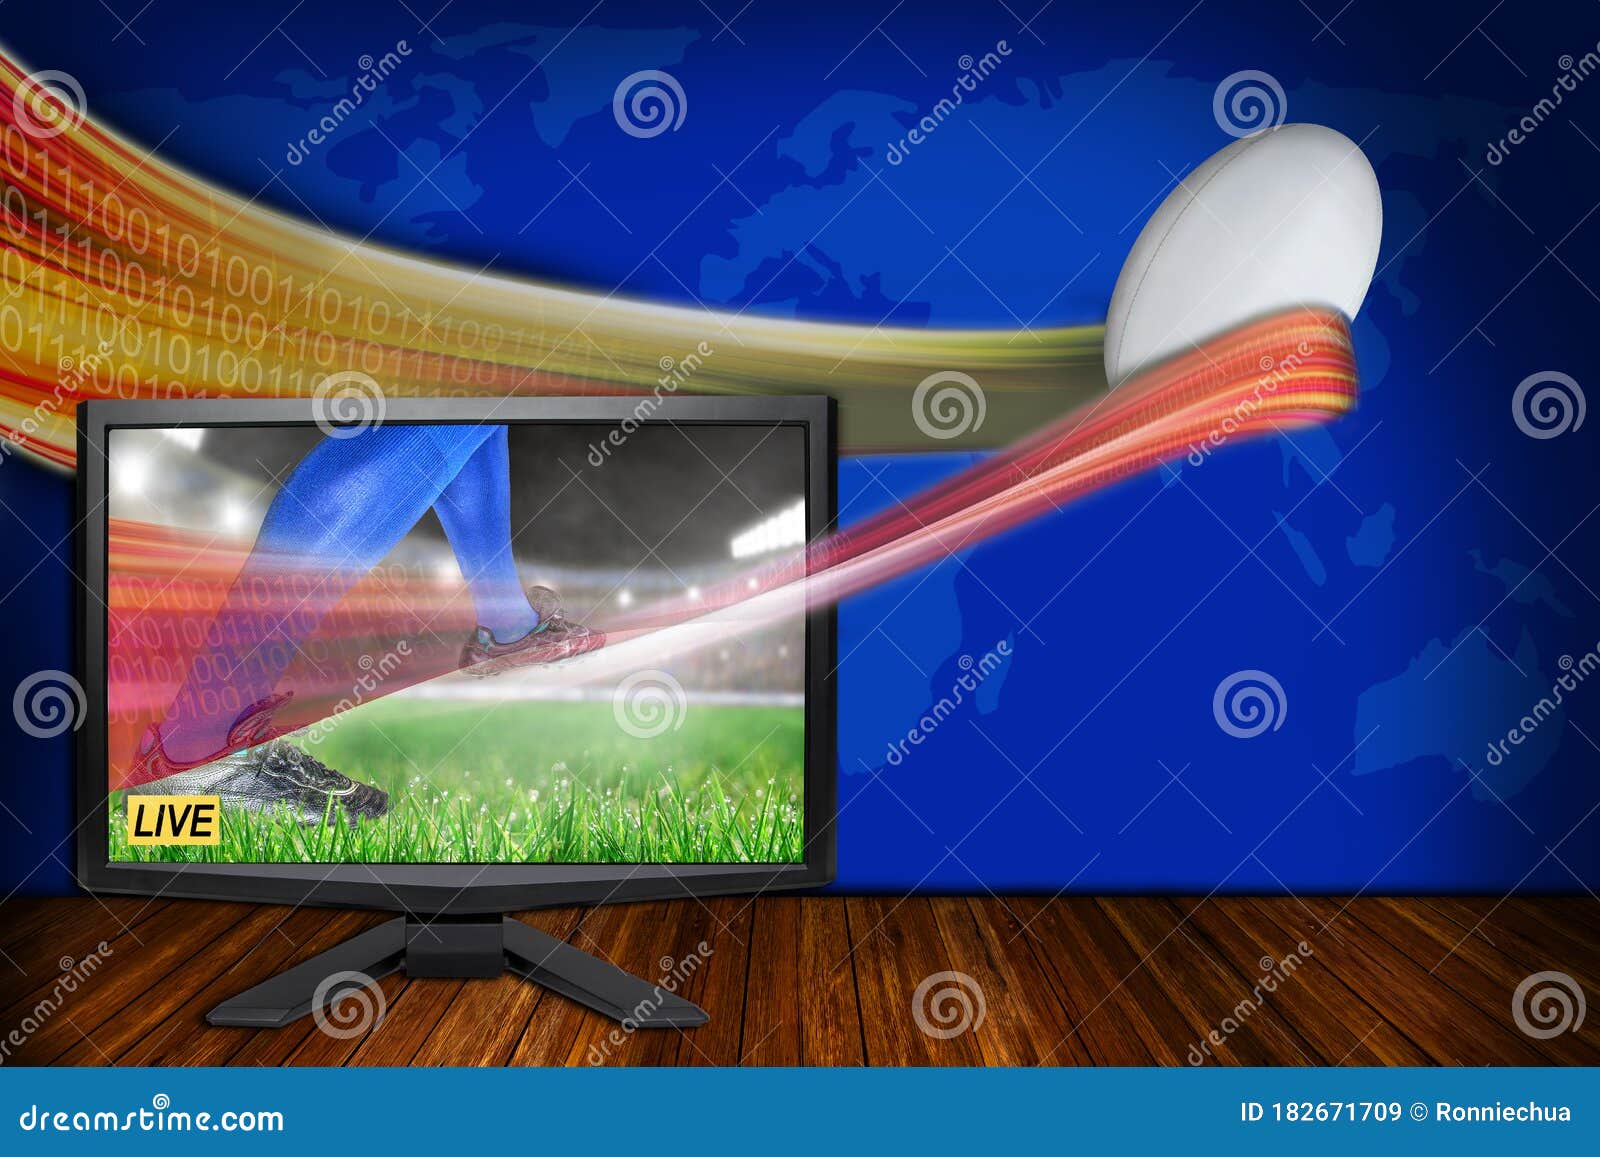 Live Rugby Tv Stock Photos